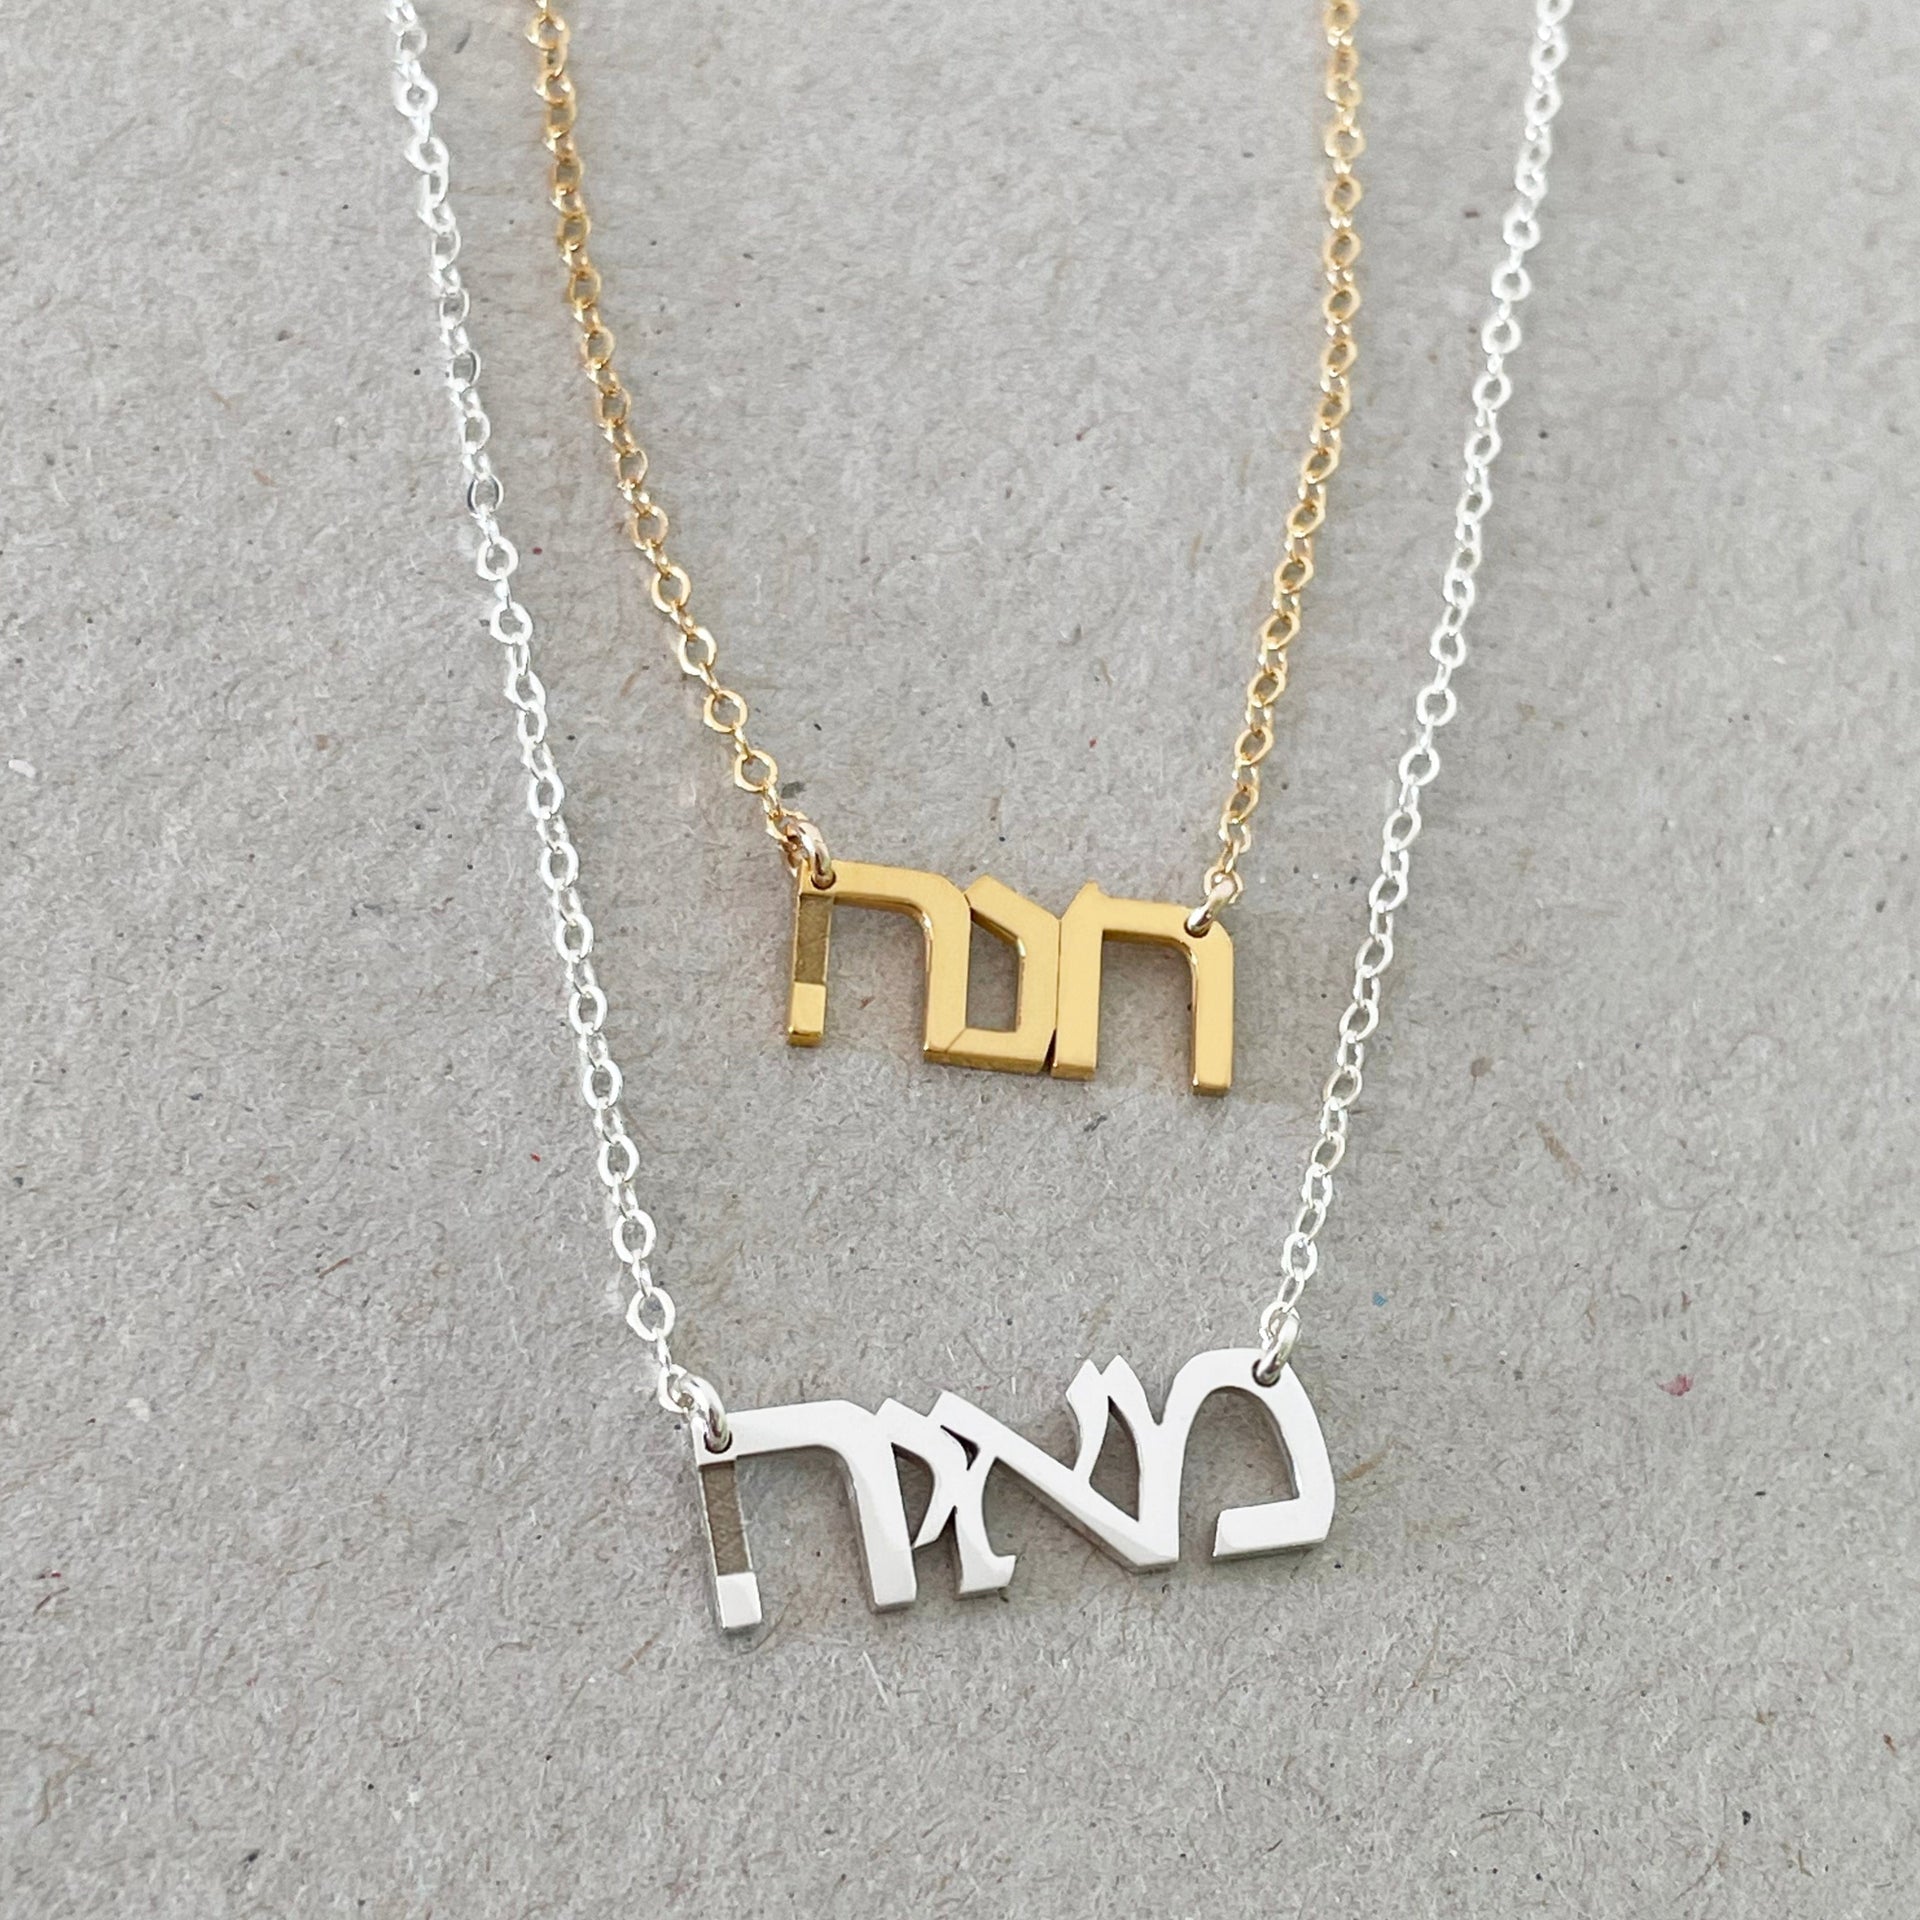 Miriam Merenfeld Jewelry Necklaces Galia Hebrew Nameplate Necklace - Sterling Silver, Gold Vermeil or Two-Tone